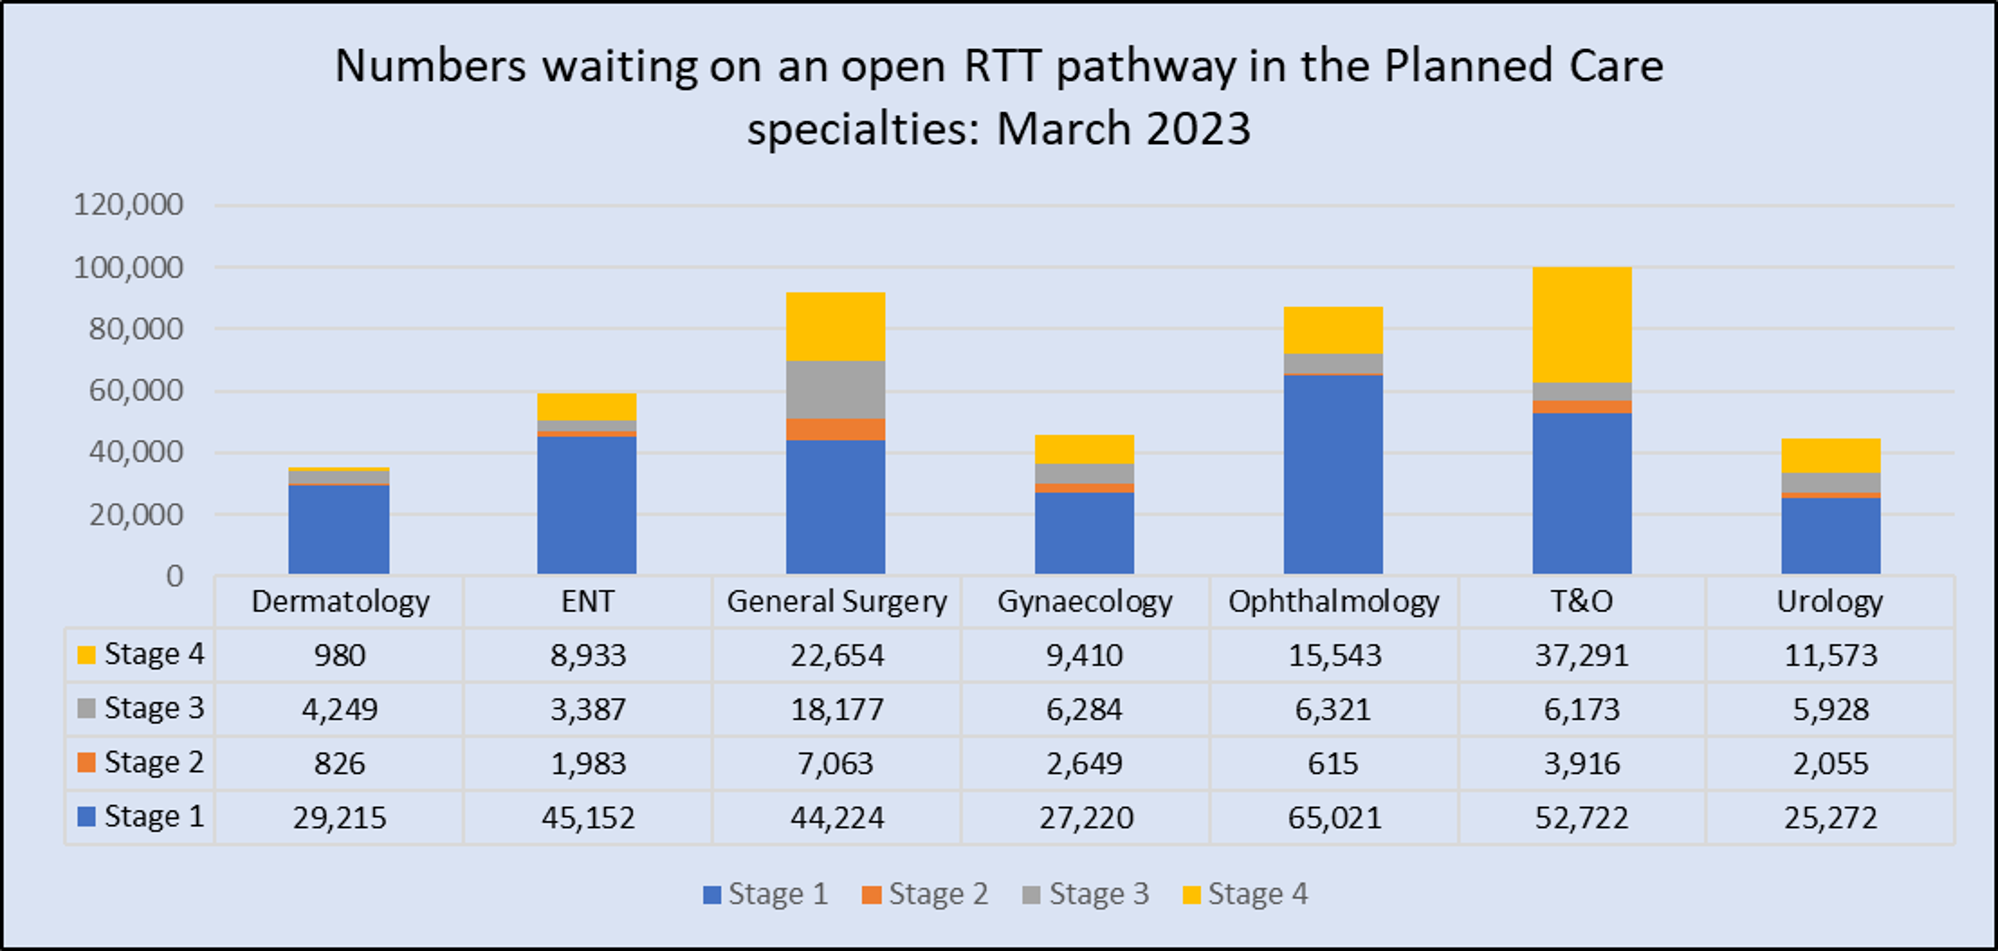 Bar chart describing numbers waiting on an open RTT pathway in the planned care specialties - March 2023